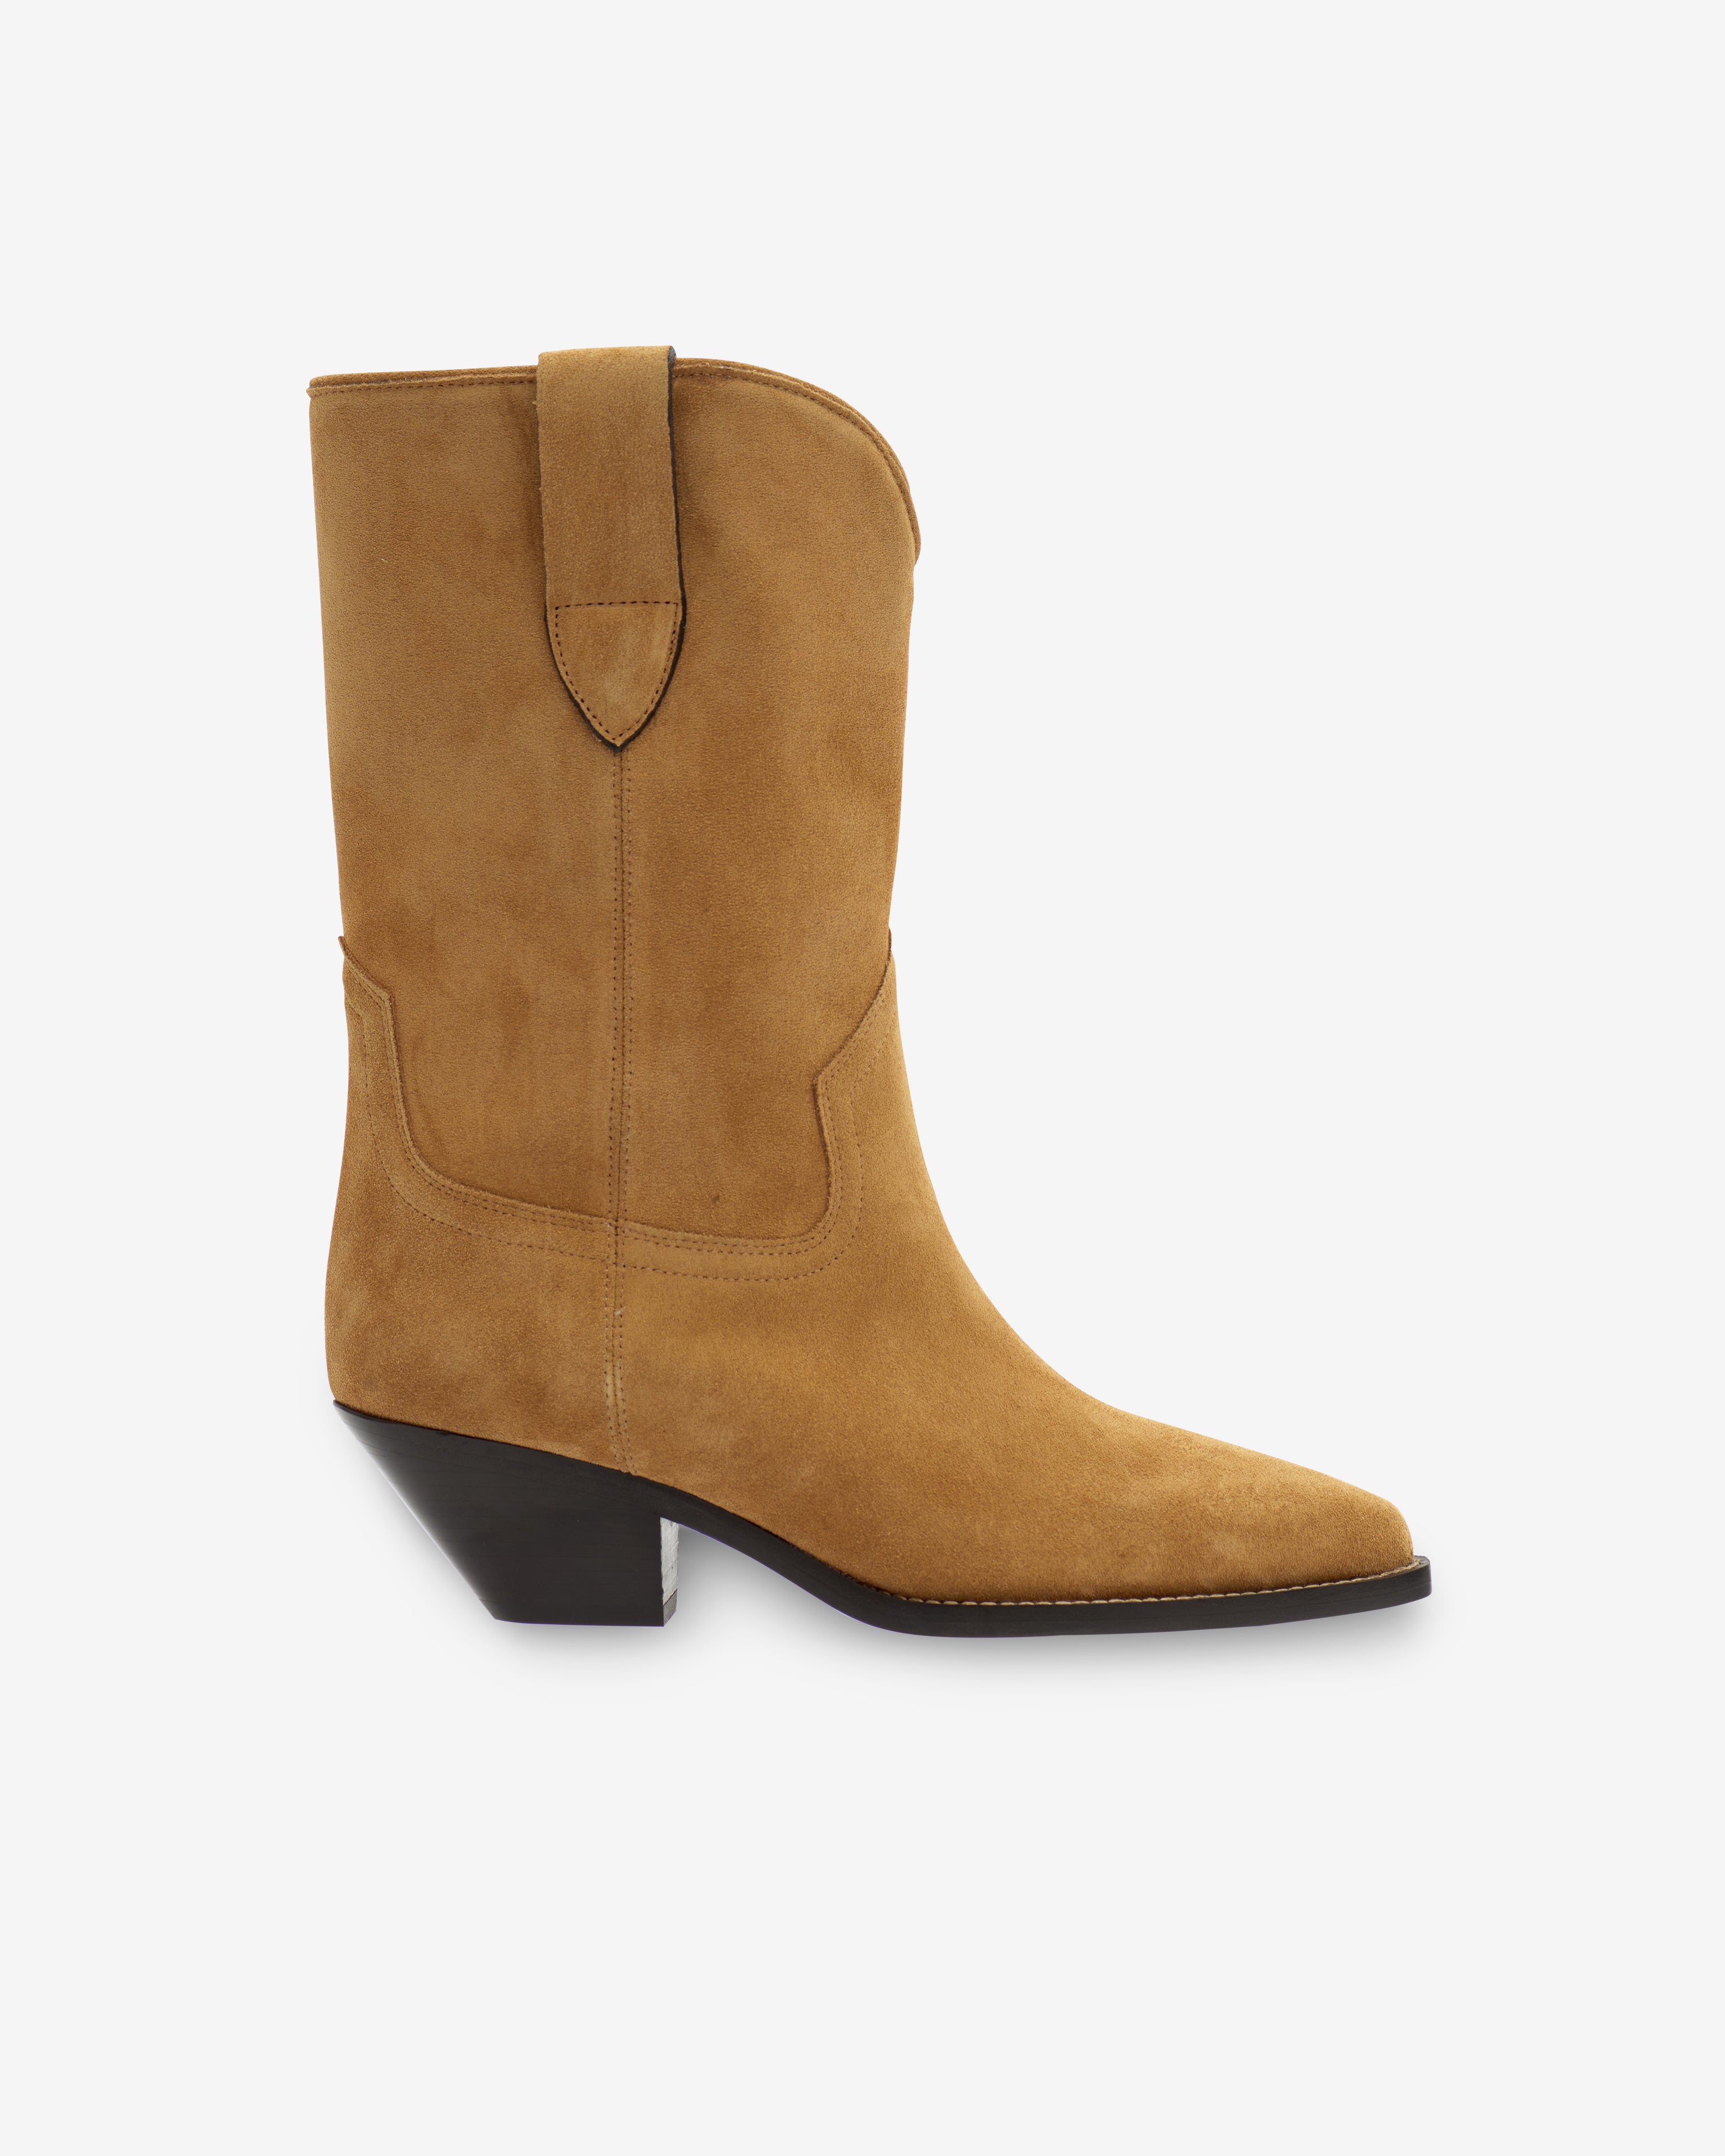 Dahope cowboy boots Woman Taupe 4